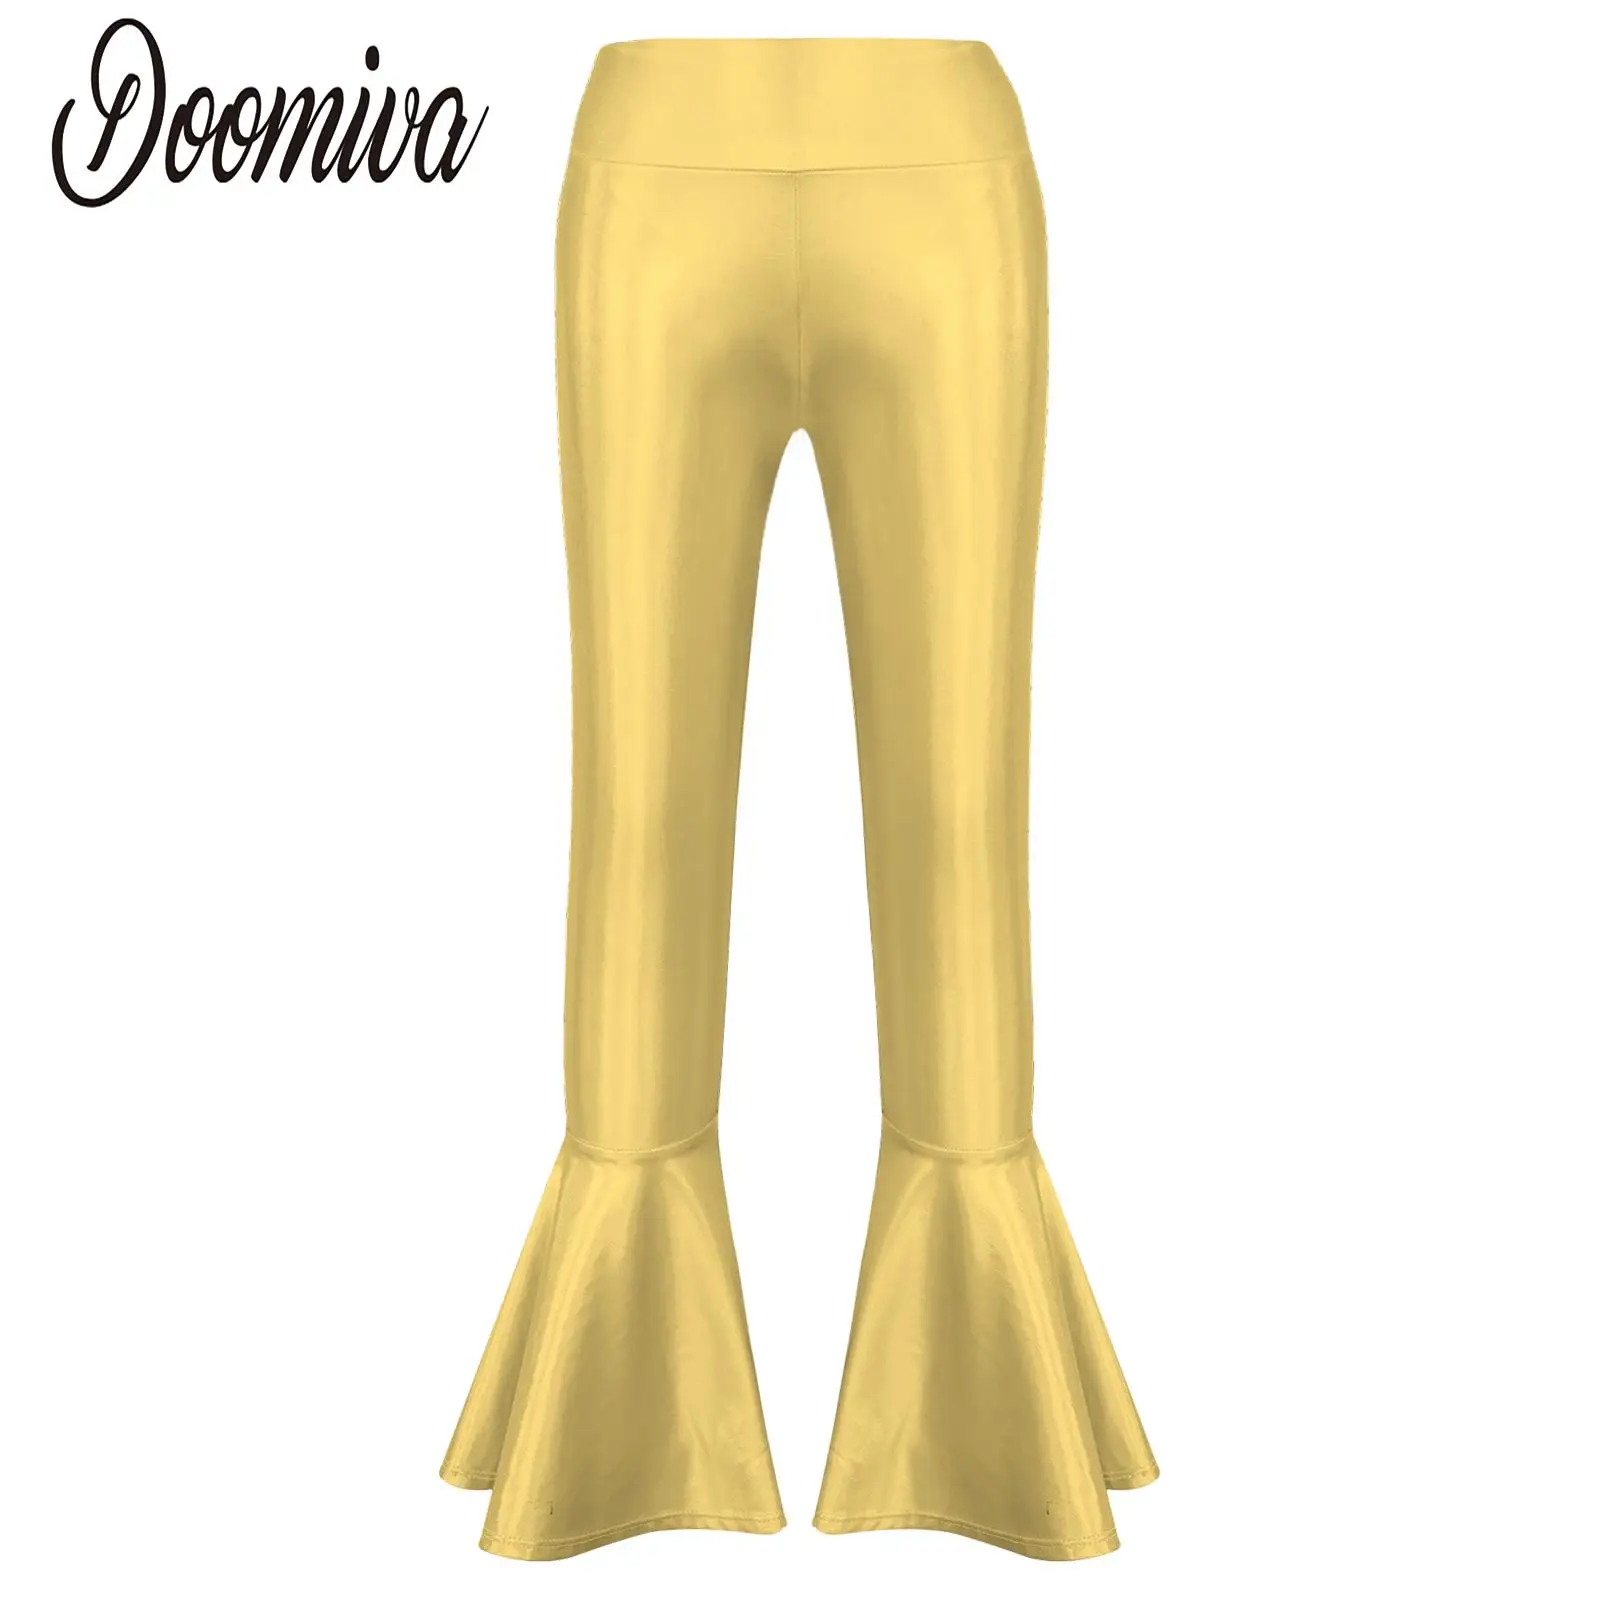 

Kids Girls Stretchy Flare Pants Bell Bottom Tights Shinny Metallic Athletic Footless Legging Pants for Performance Dance Costume